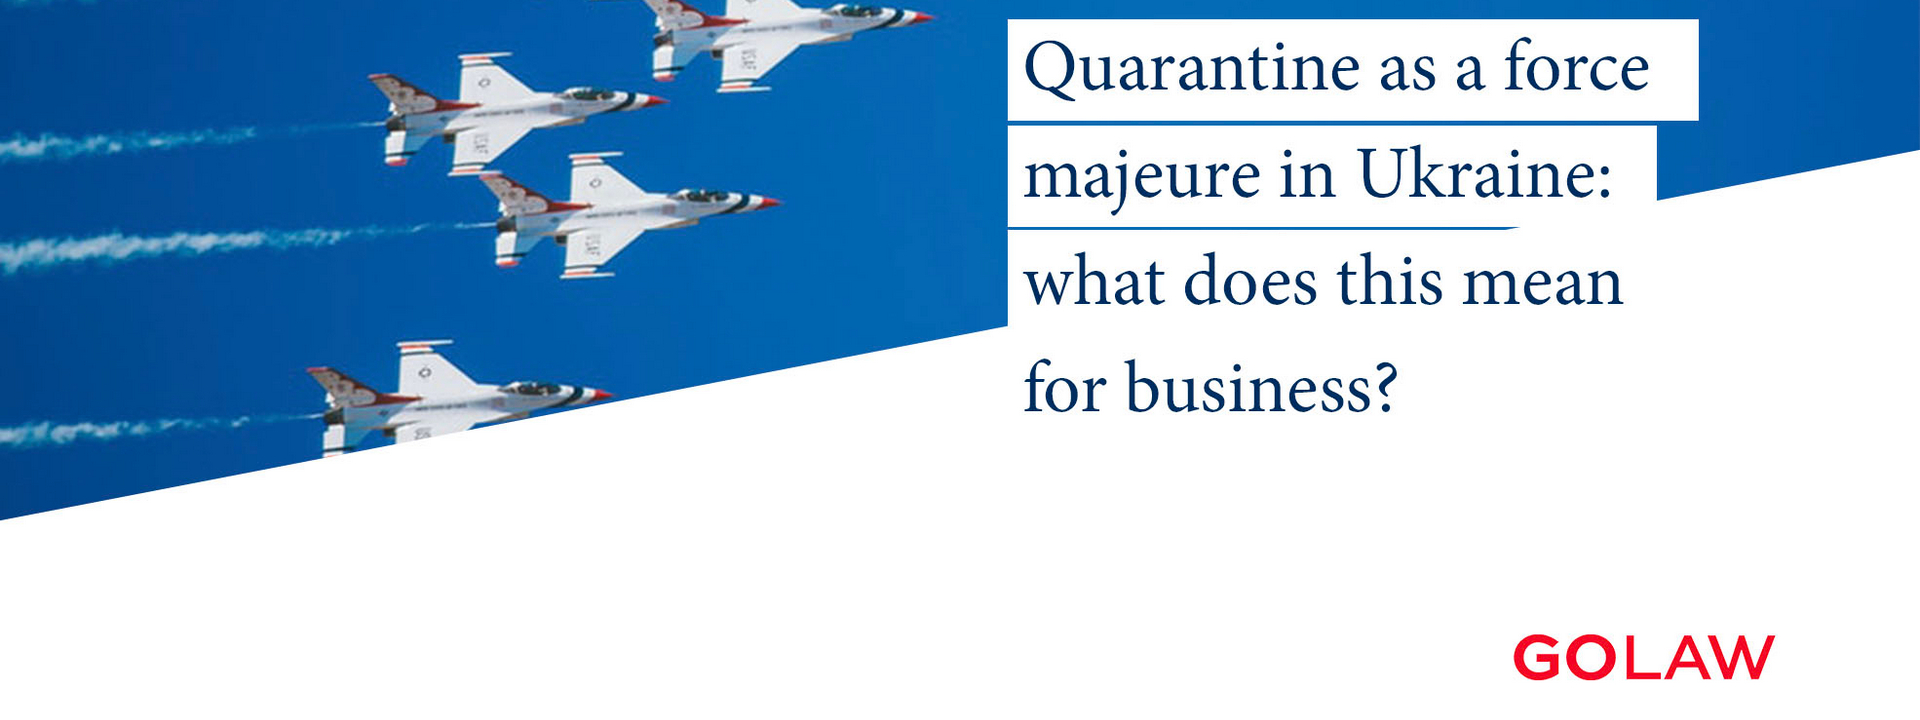 Quarantine as a Force Majeure: What Does This Mean for Business?